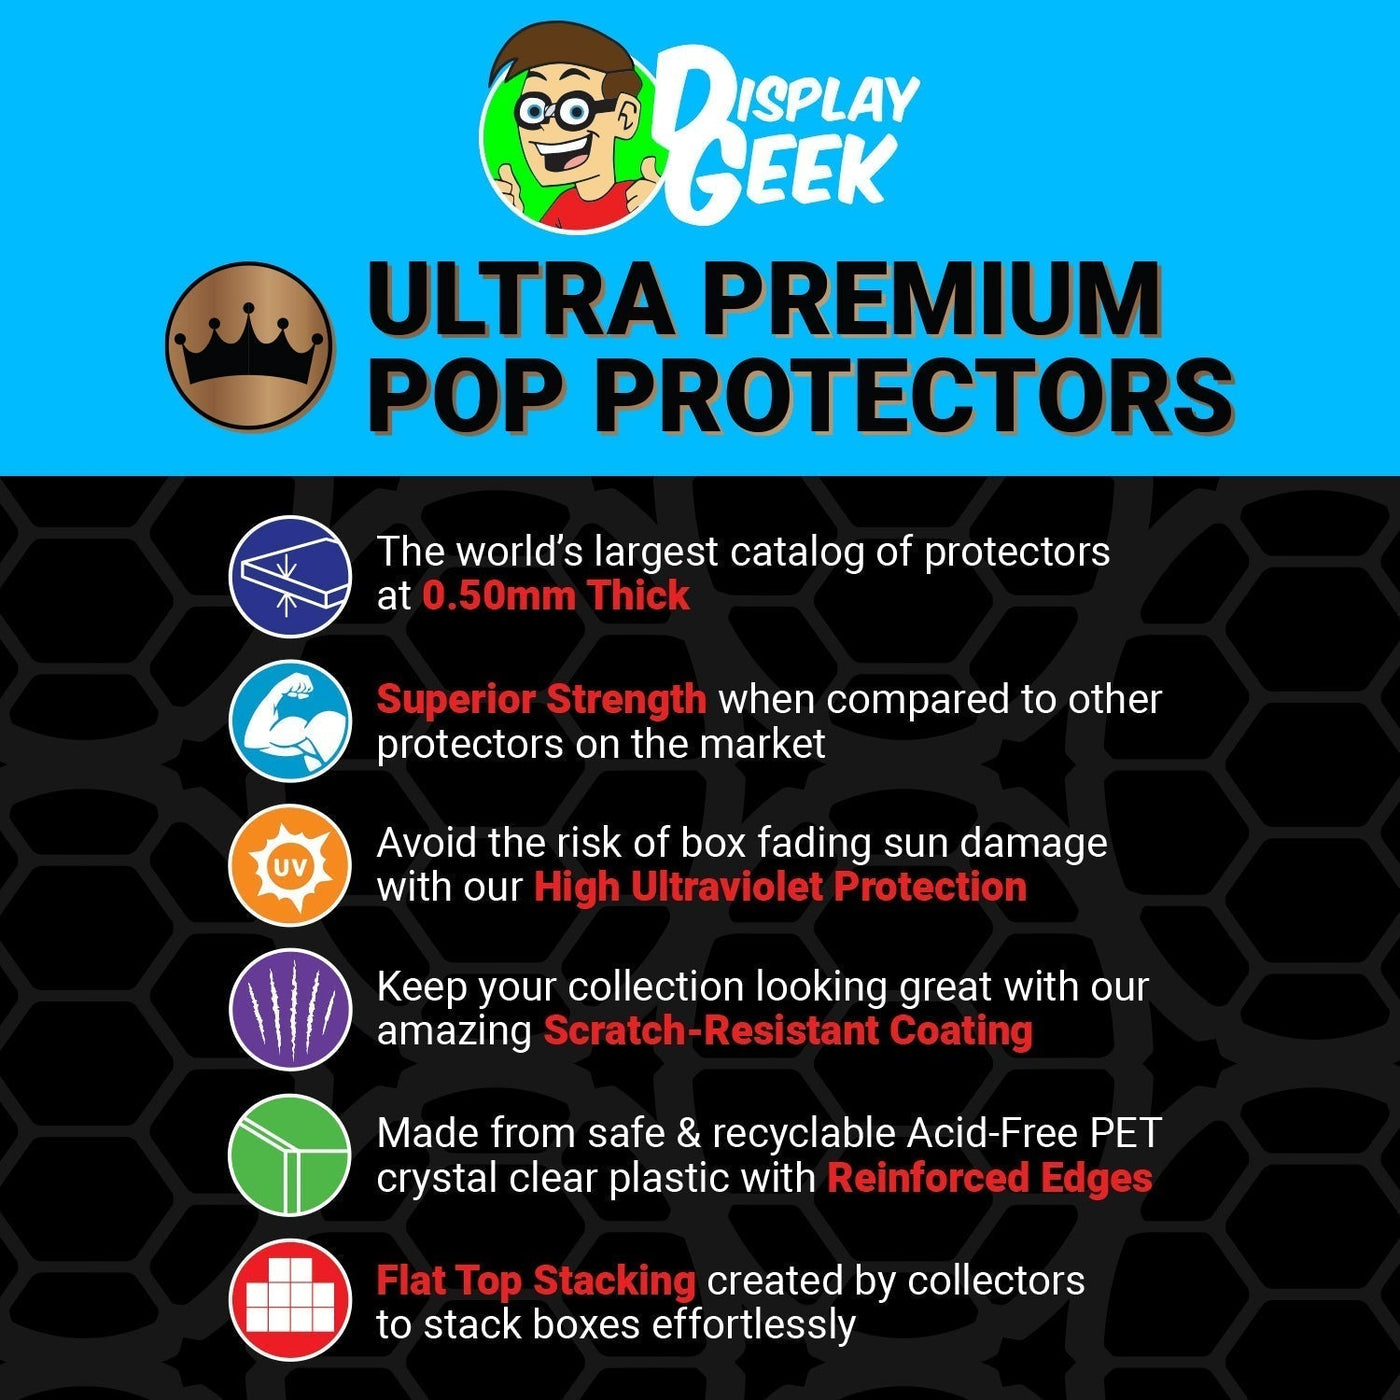 Pop Protector for Guardians Ship Groot in Benatar #1026 Funko Pop Deluxe on The Protector Guide App by Display Geek